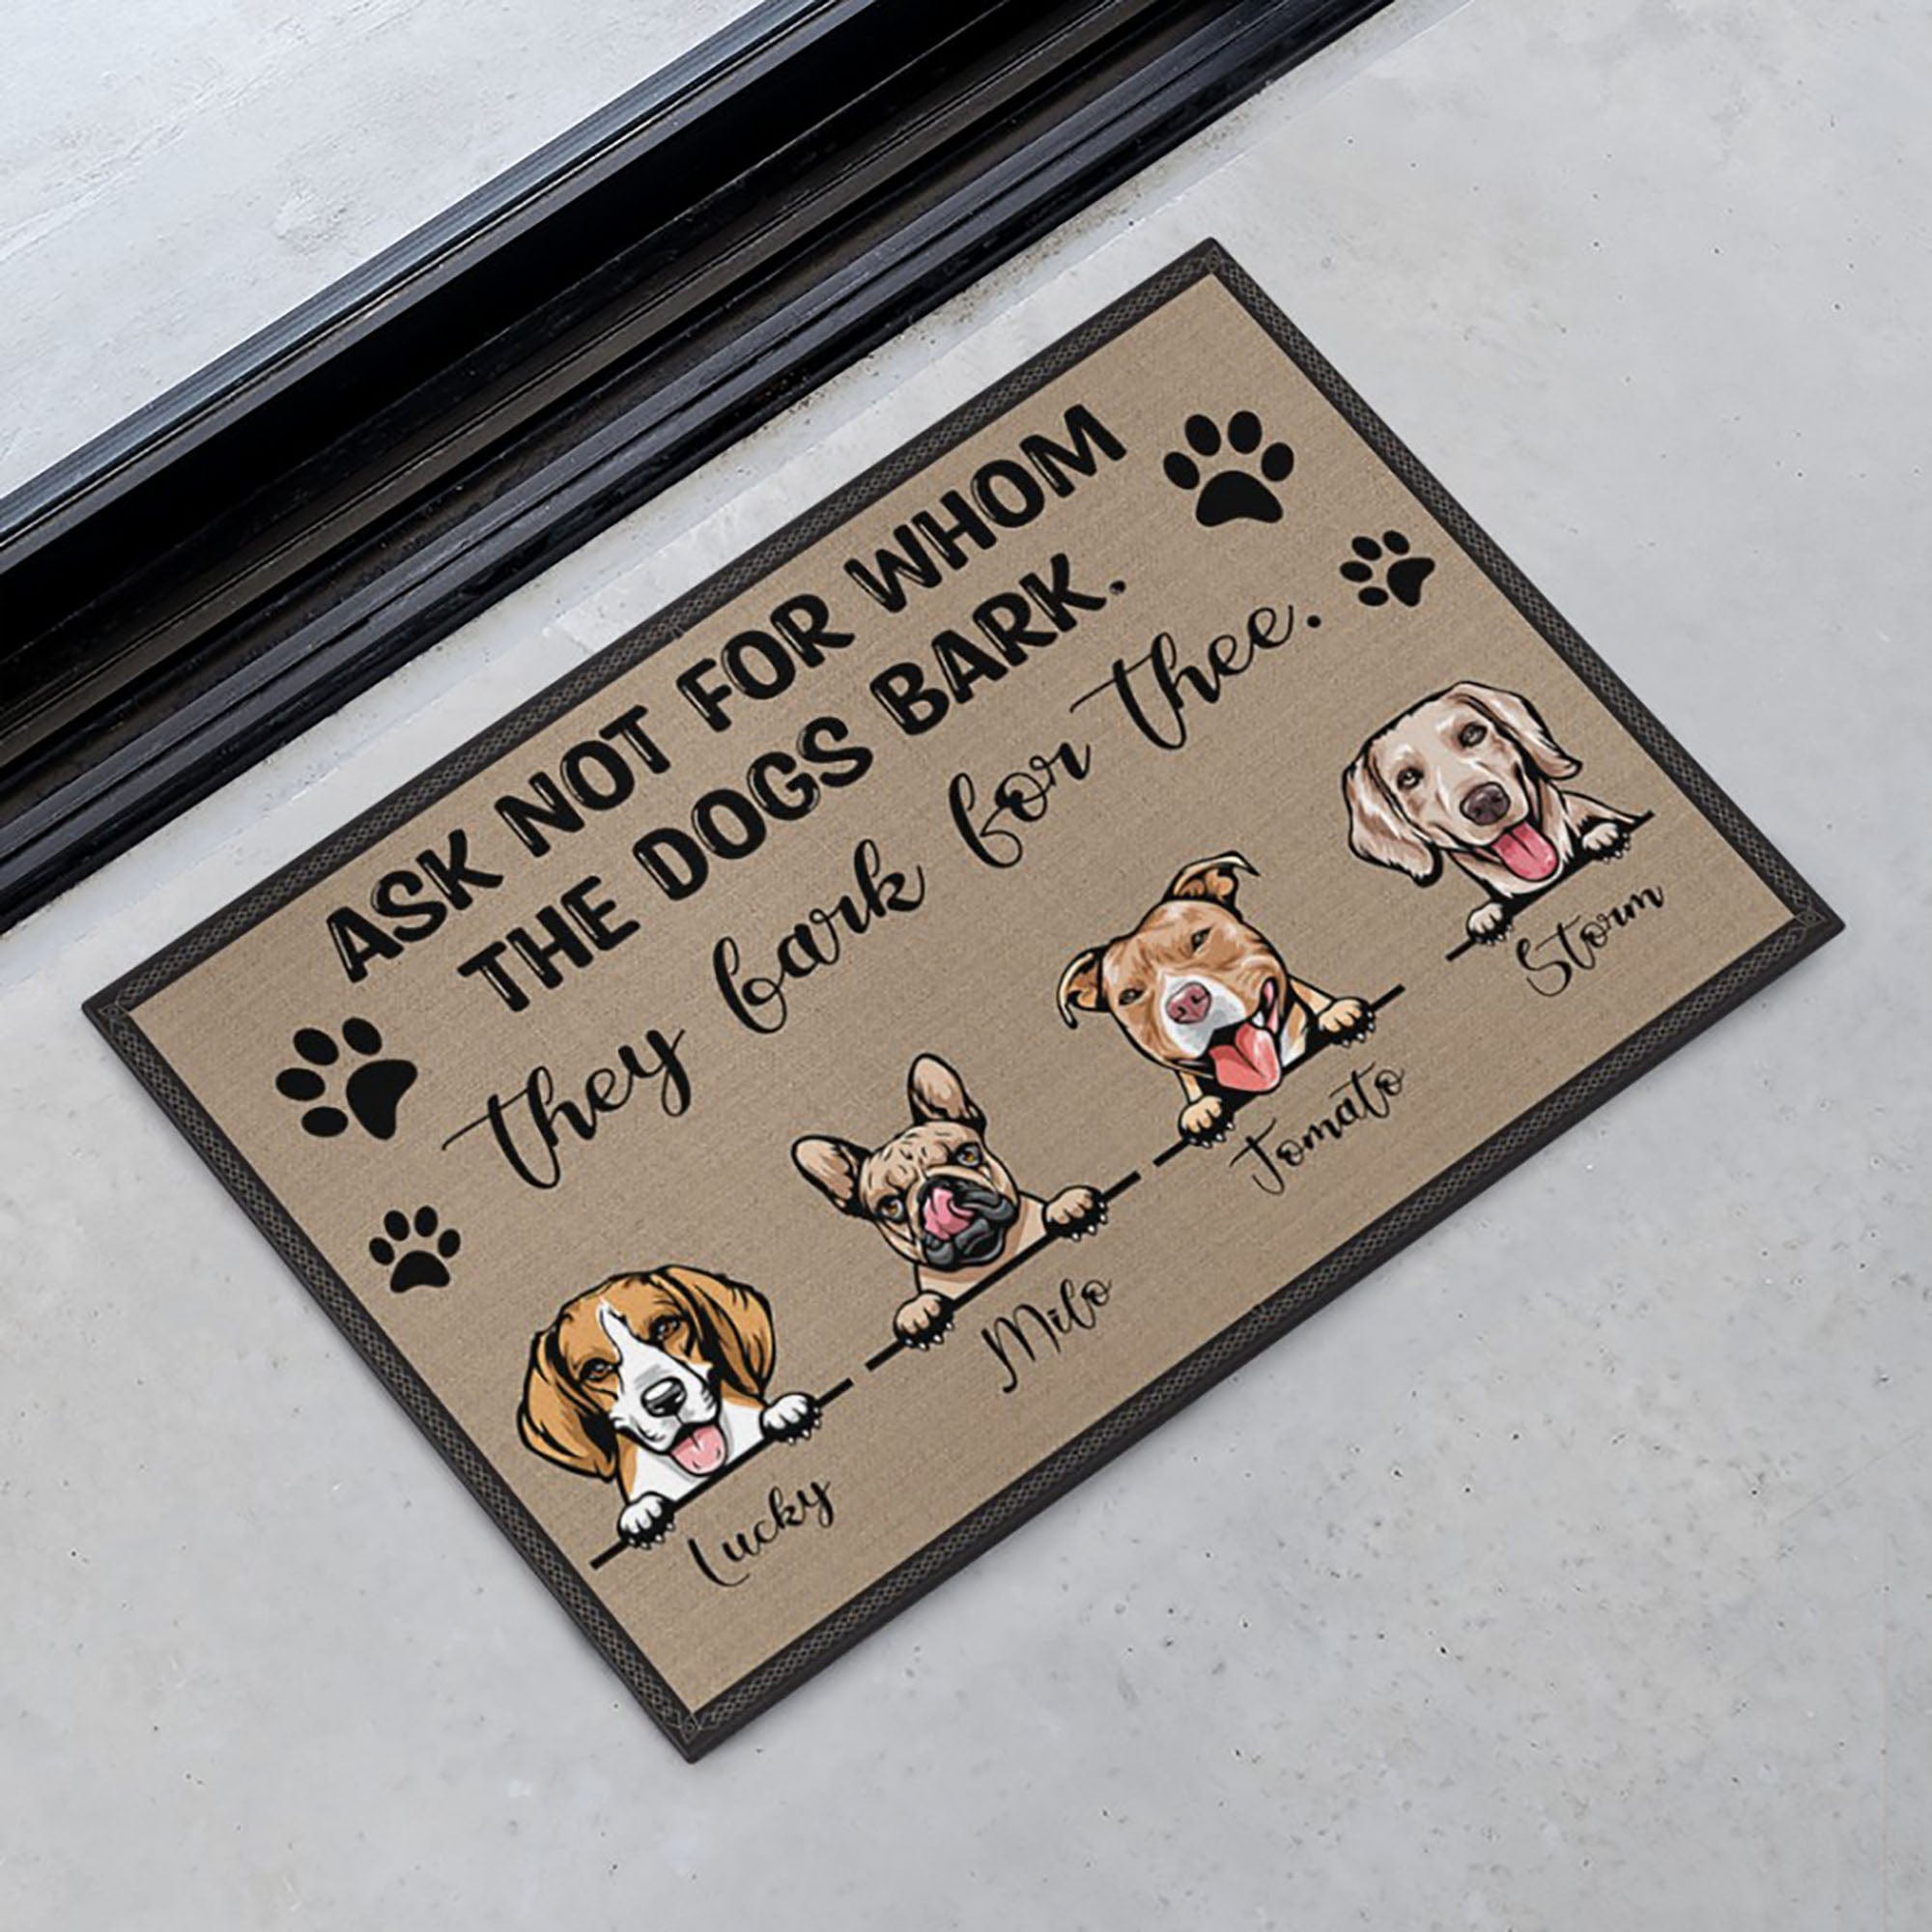 GeckoCustom Ask Not For Whom The Dog Barks It Barks For Thee Personalized Custom Dog Doormats C408 24x16 inch - 60x40 cm